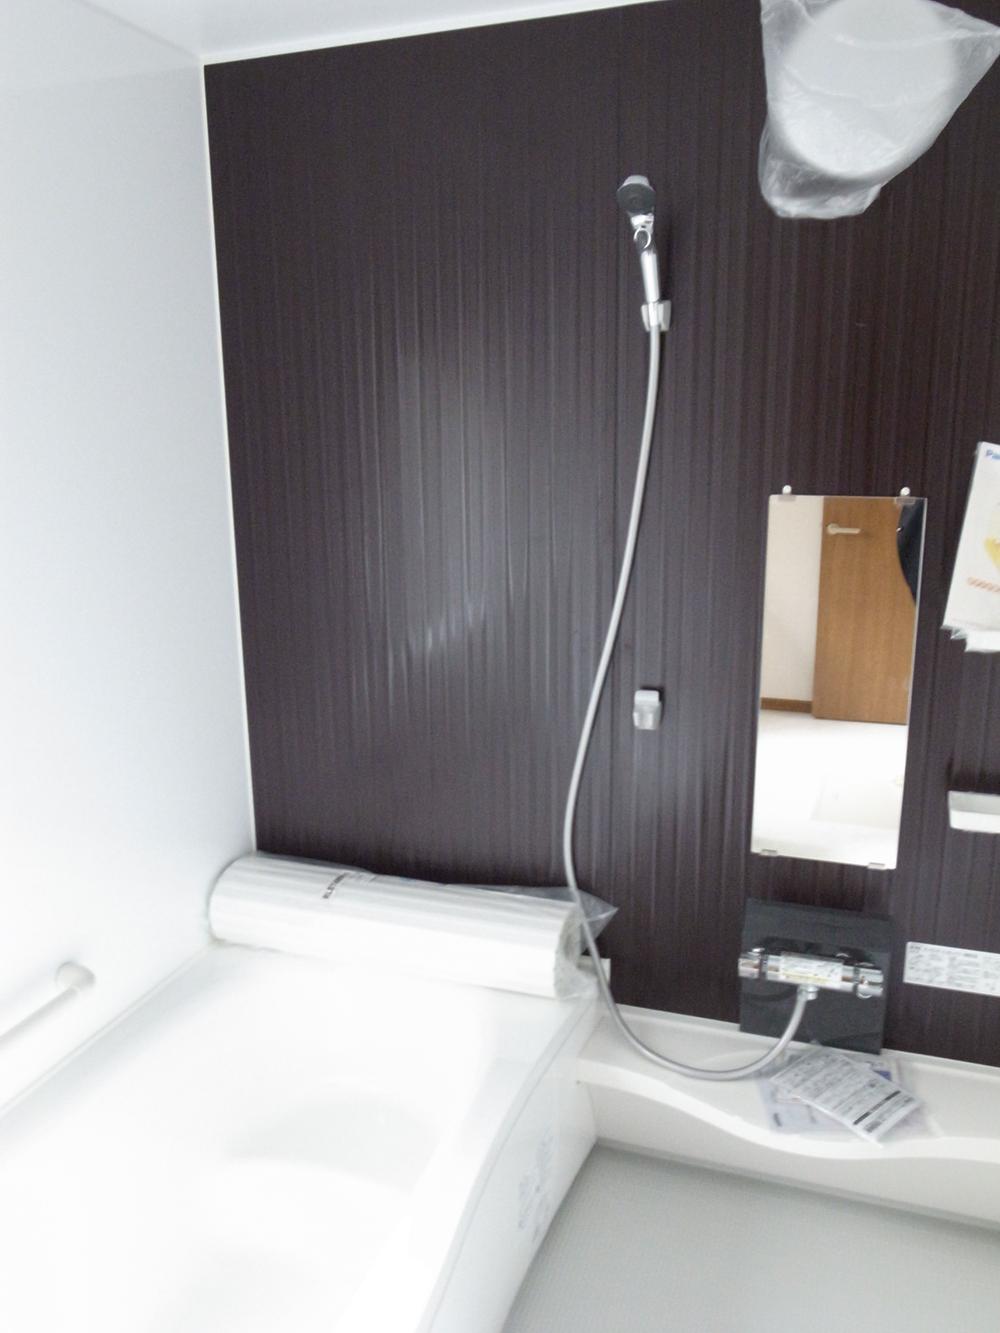 Bathroom.  ☆ Panasonic bathroom ☆  ・ Tub of Relief hard insulation specifications heat. Saving energy costs and the number of times also to reduce reheating.